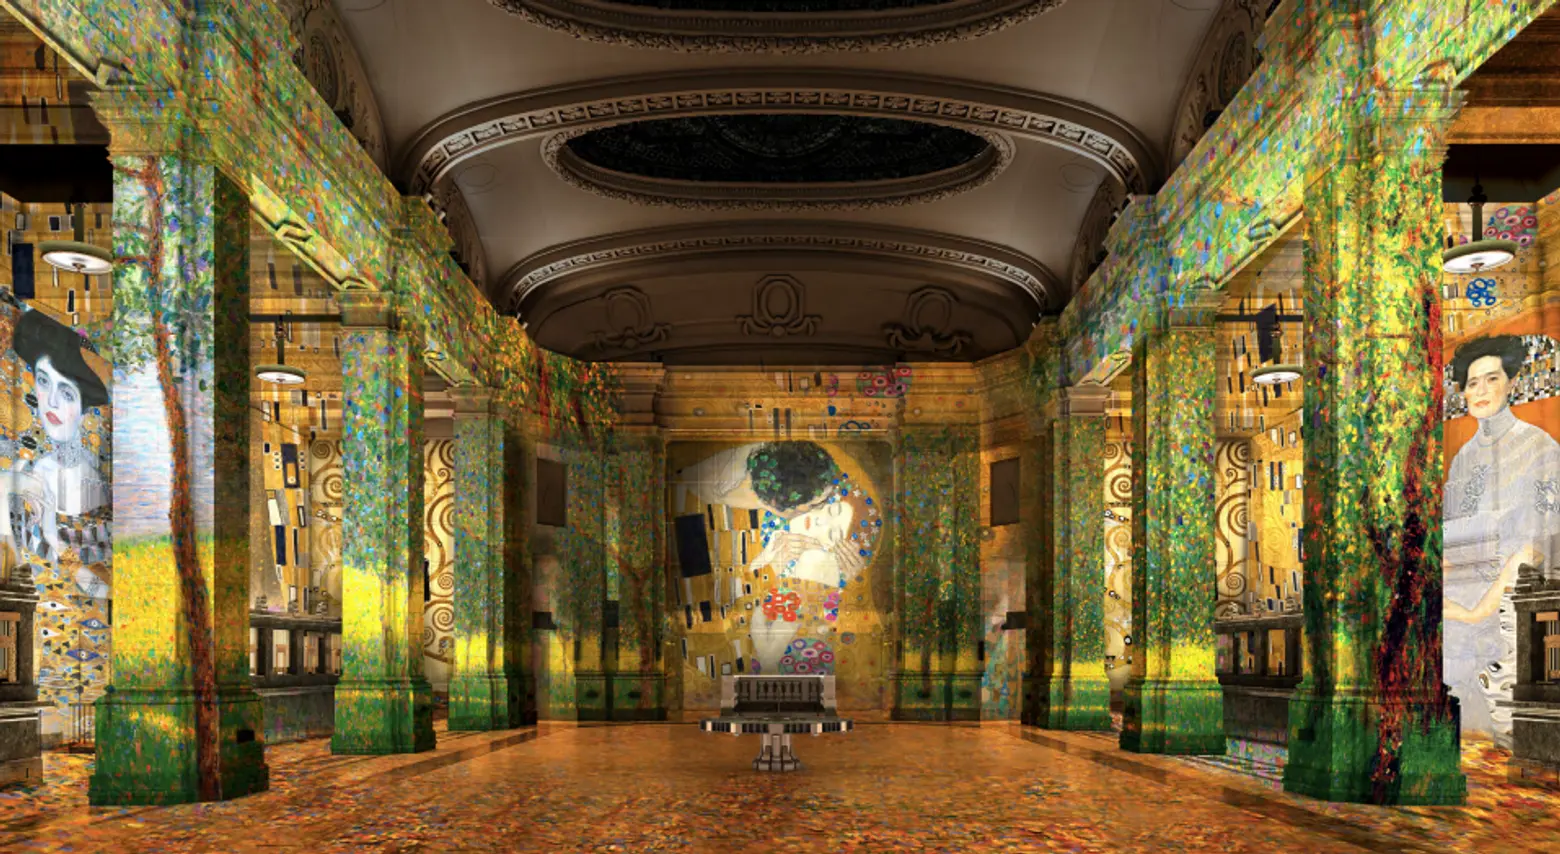 See the immersive art museum proposed for a landmarked Lower Manhattan bank hall